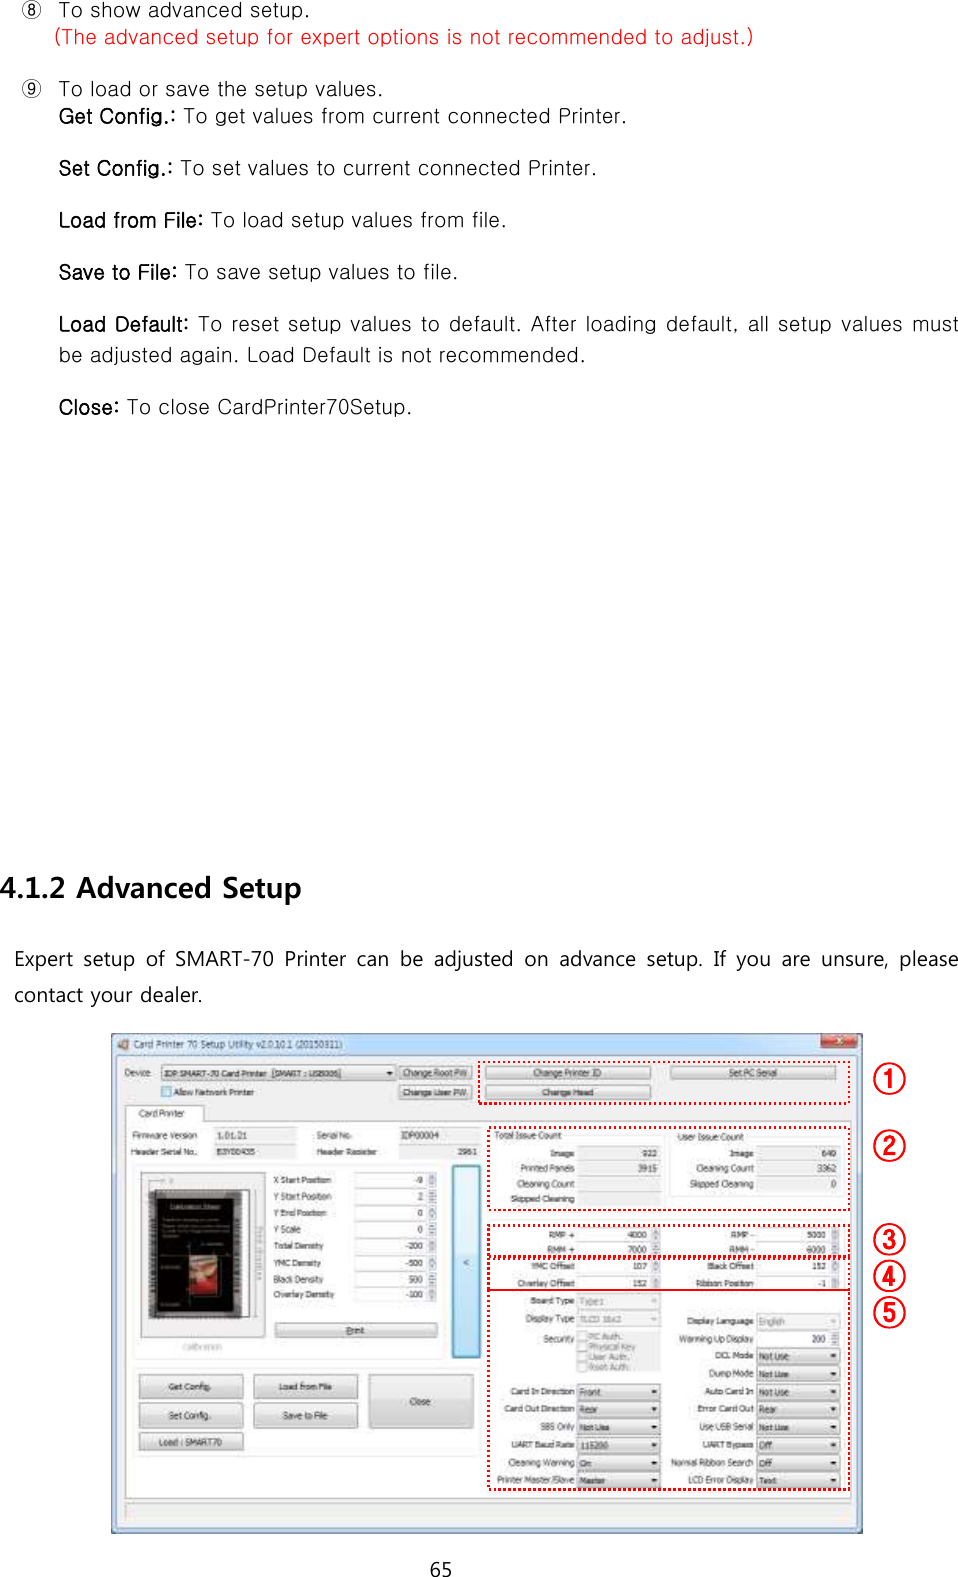 65  ⑧ To show advanced setup.   (The advanced setup for expert options is not recommended to adjust.) ⑨ To load or save the setup values. Get Config.: To get values from current connected Printer.   Set Config.: To set values to current connected Printer.   Load from File: To load setup values from file.   Save to File: To save setup values to file.   Load Default: To reset setup values to default. After loading default, all setup  values must be adjusted again. Load Default is not recommended. Close: To close CardPrinter70Setup.           4.1.2 Advanced Setup Expert  setup  of SMART-70  Printer  can  be  adjusted  on  advance  setup.  If  you  are unsure, please contact your dealer.  ①  ② ③ ⑤ ④ 